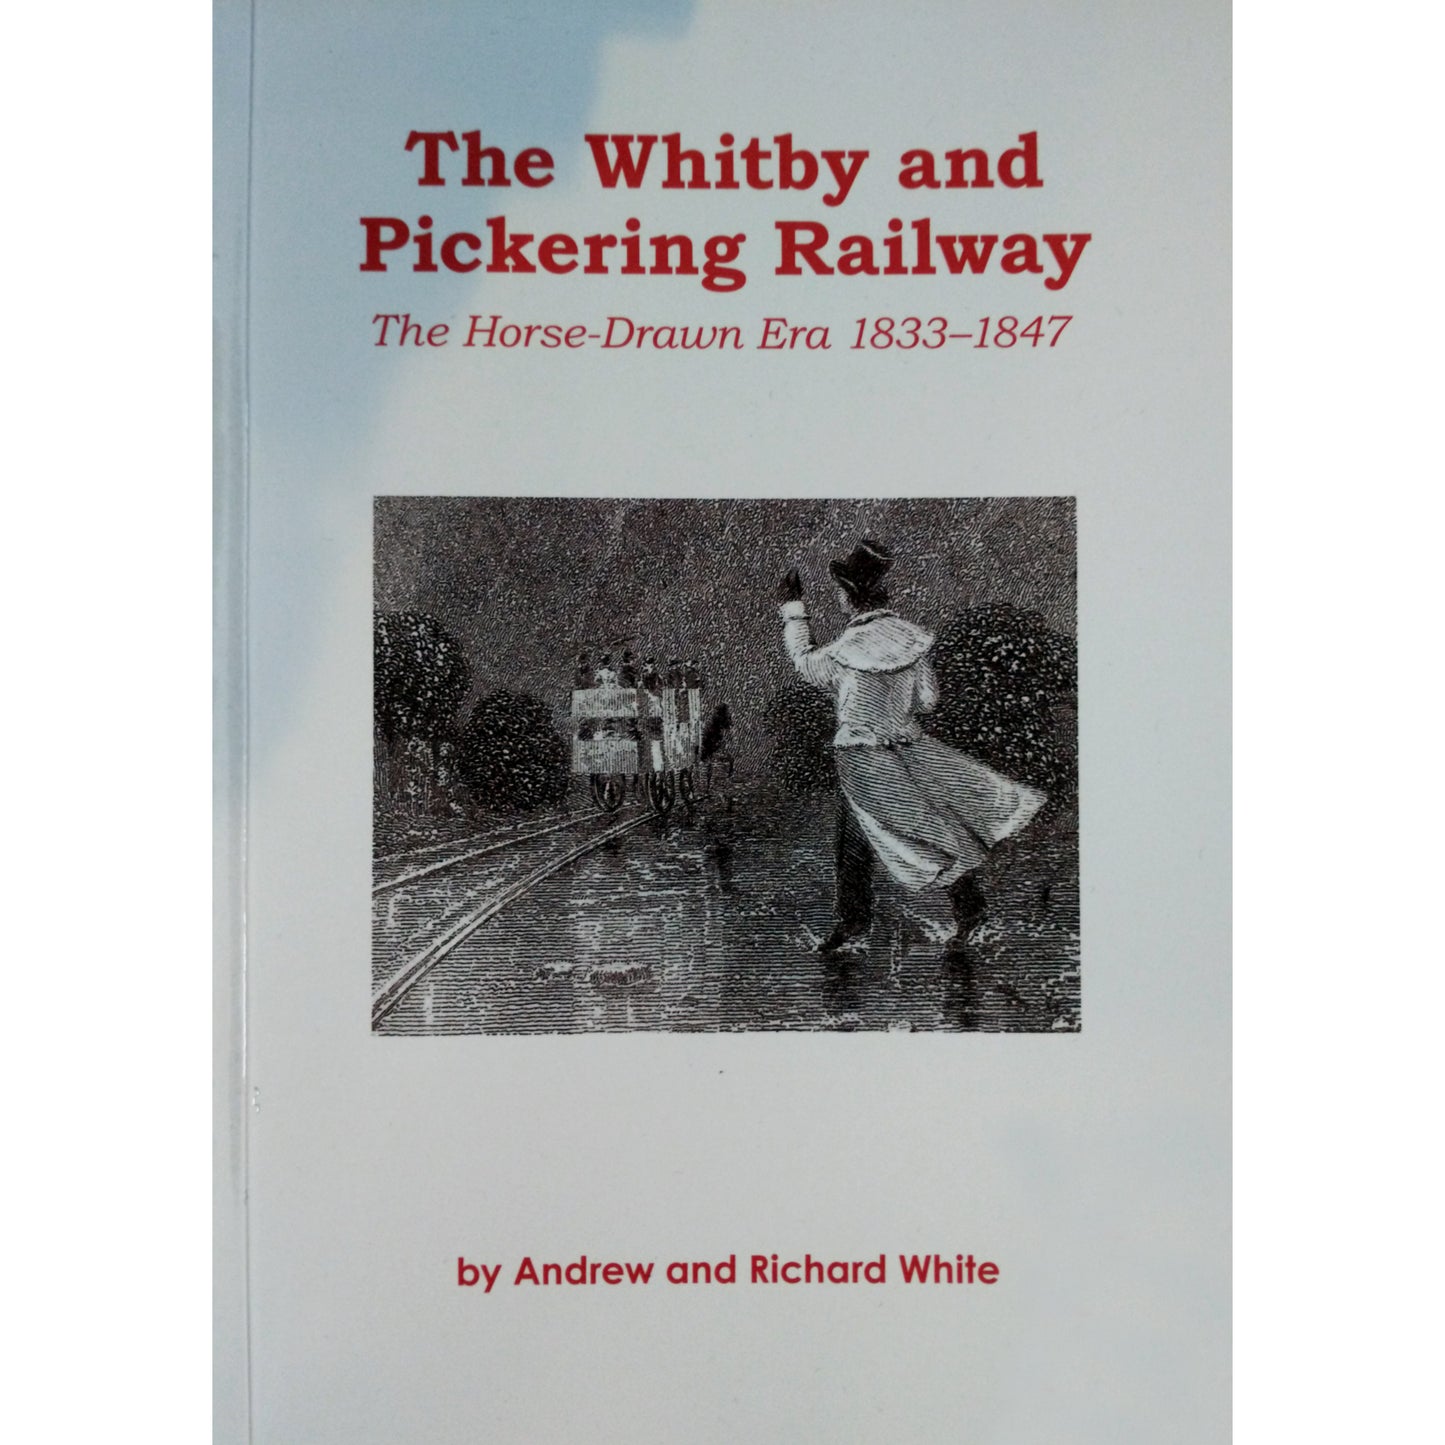 Front of grey hardback book with etching of man waving off horse-drawn train.  It has The Whitby and Pickering Railway, the horse-drawn era 1833-1847 printed in red above the picture and by Andrew and Richard White underneath.